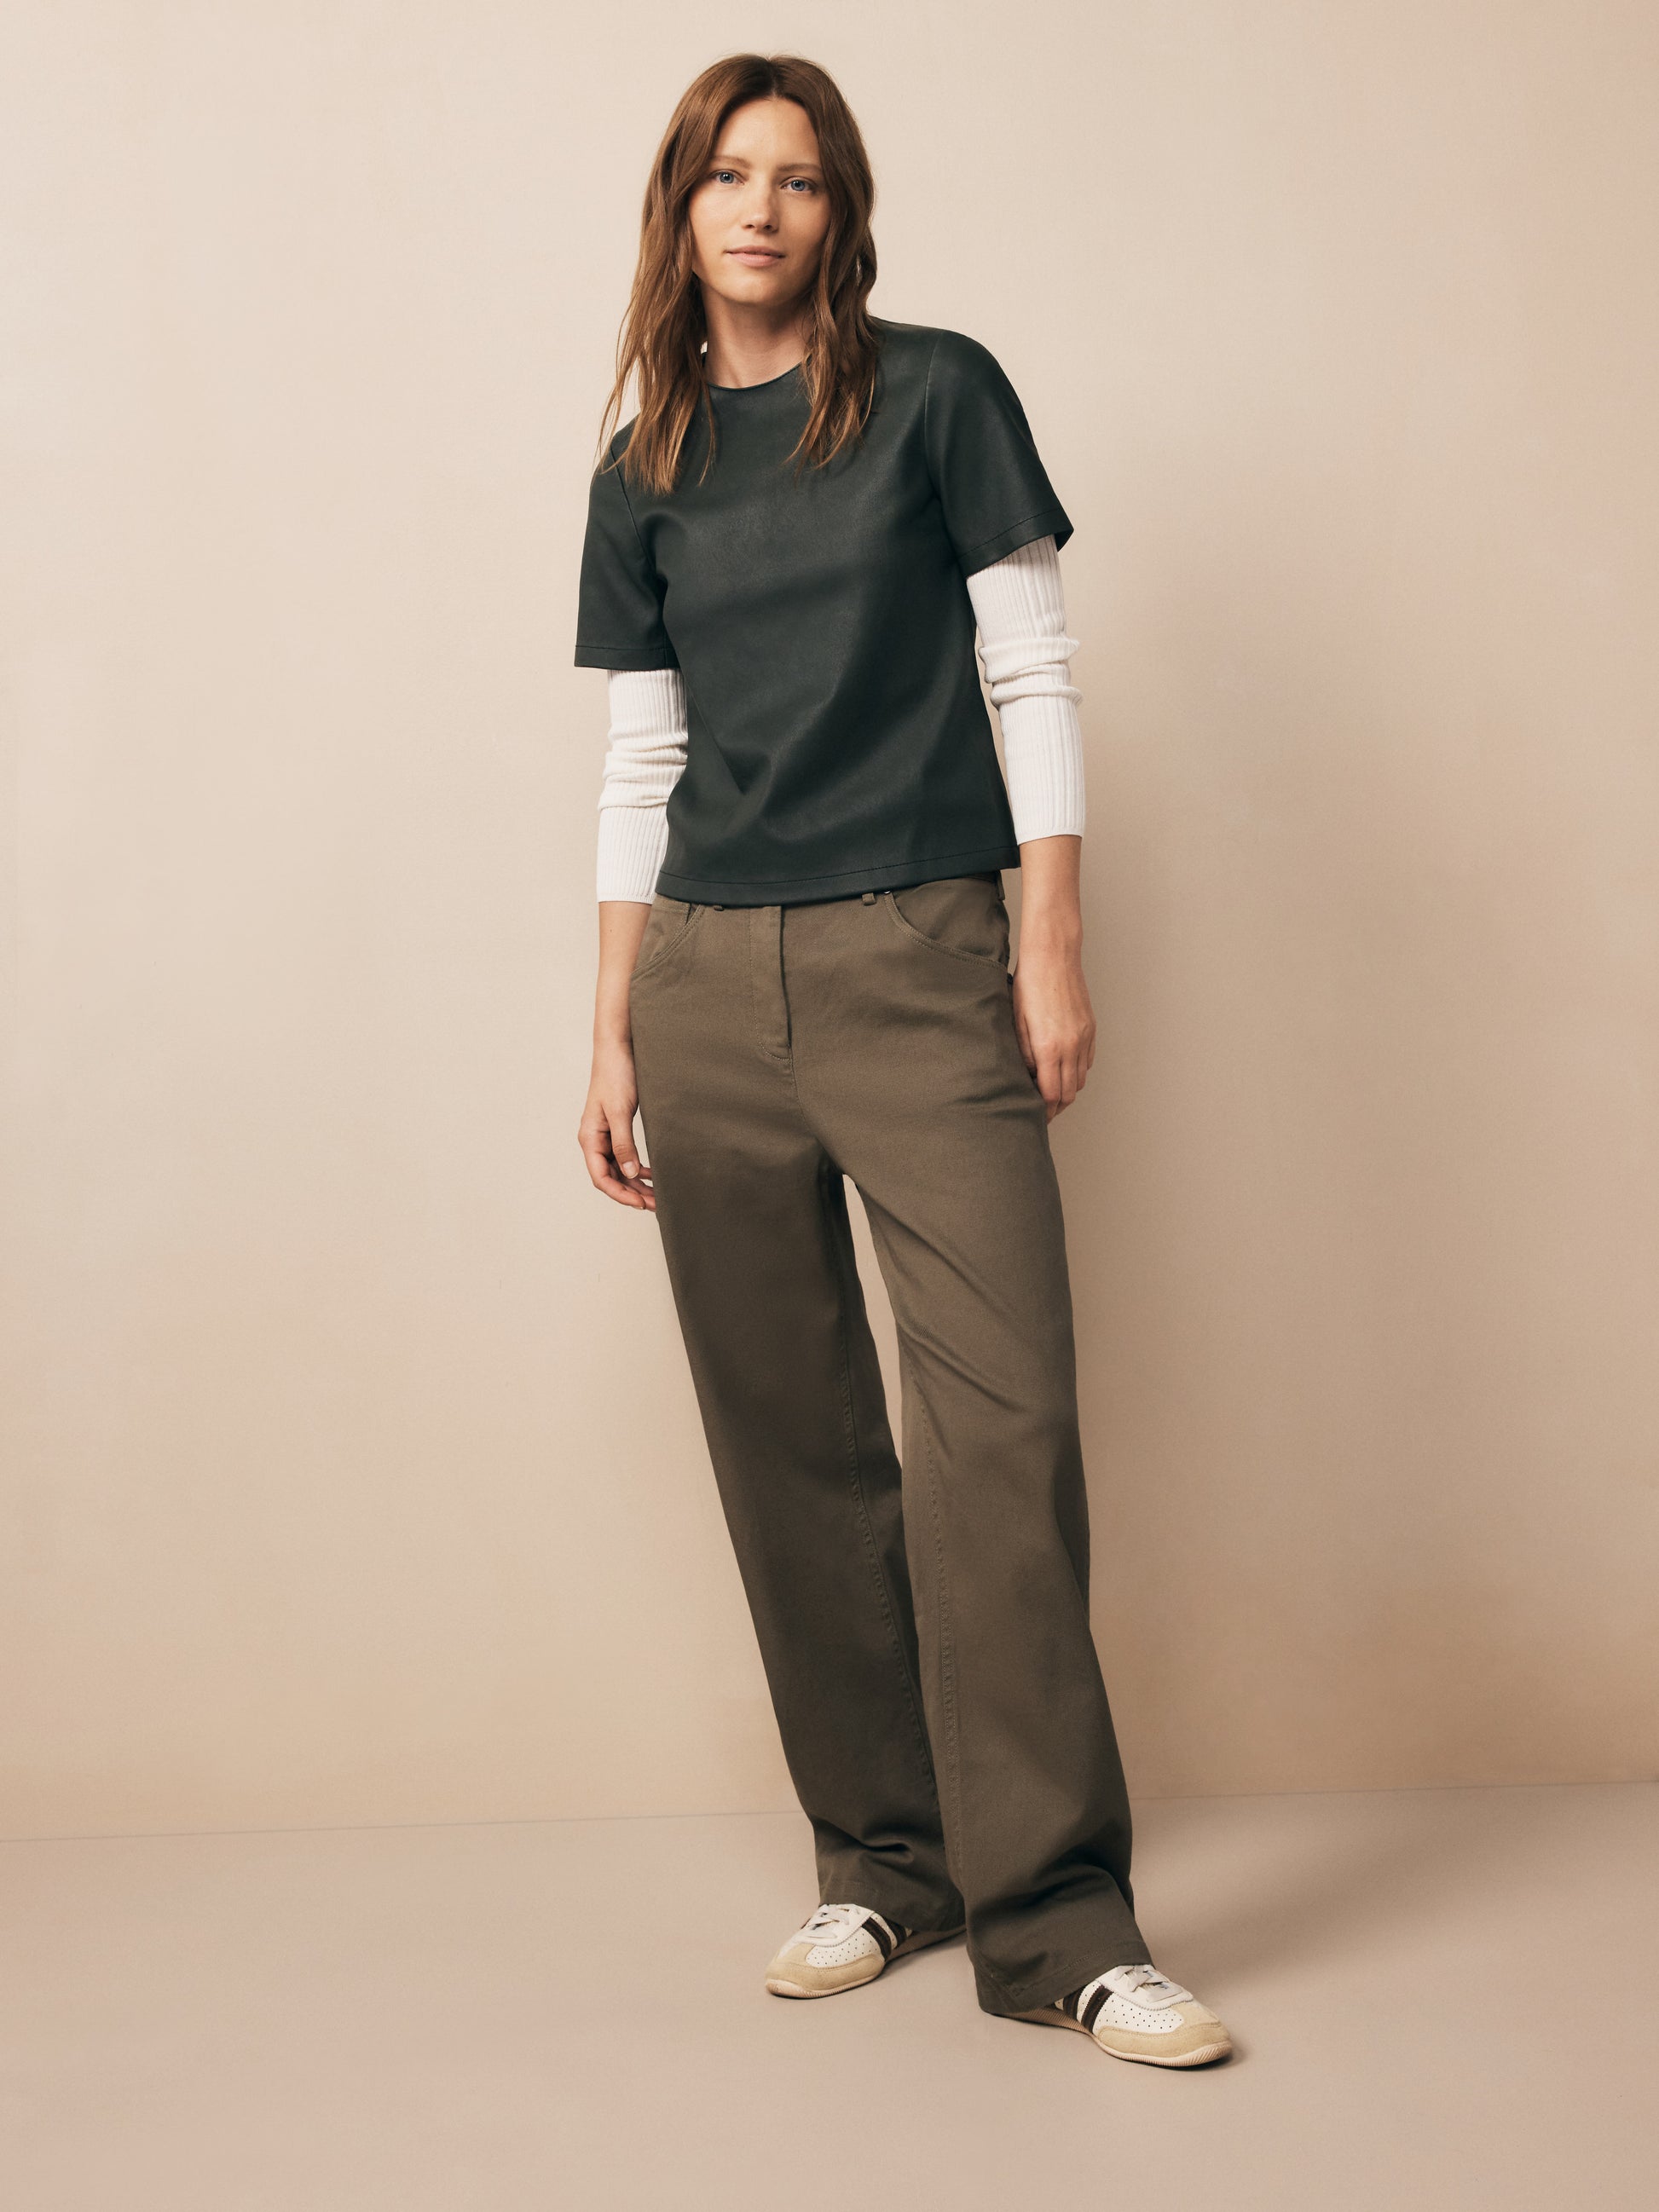 TWP Dark olive Mila Pant in Cotton Twill view 6